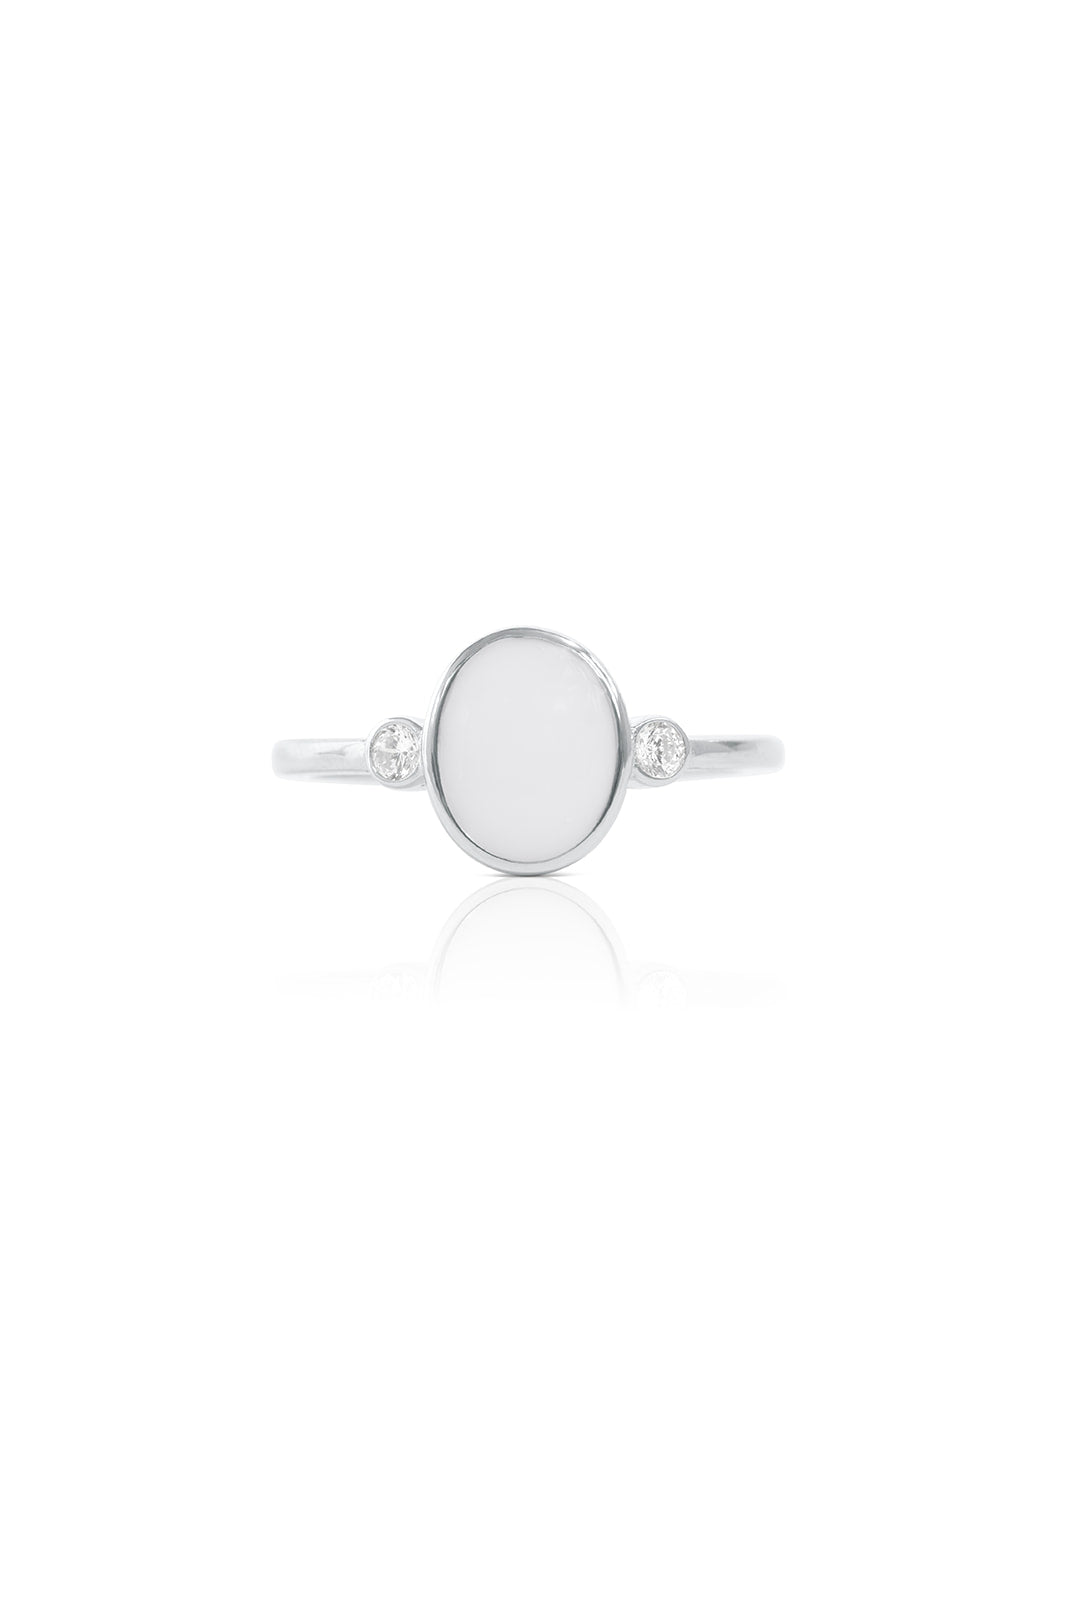 Breastmilk Oval Stacker Top Ring - White Gold 